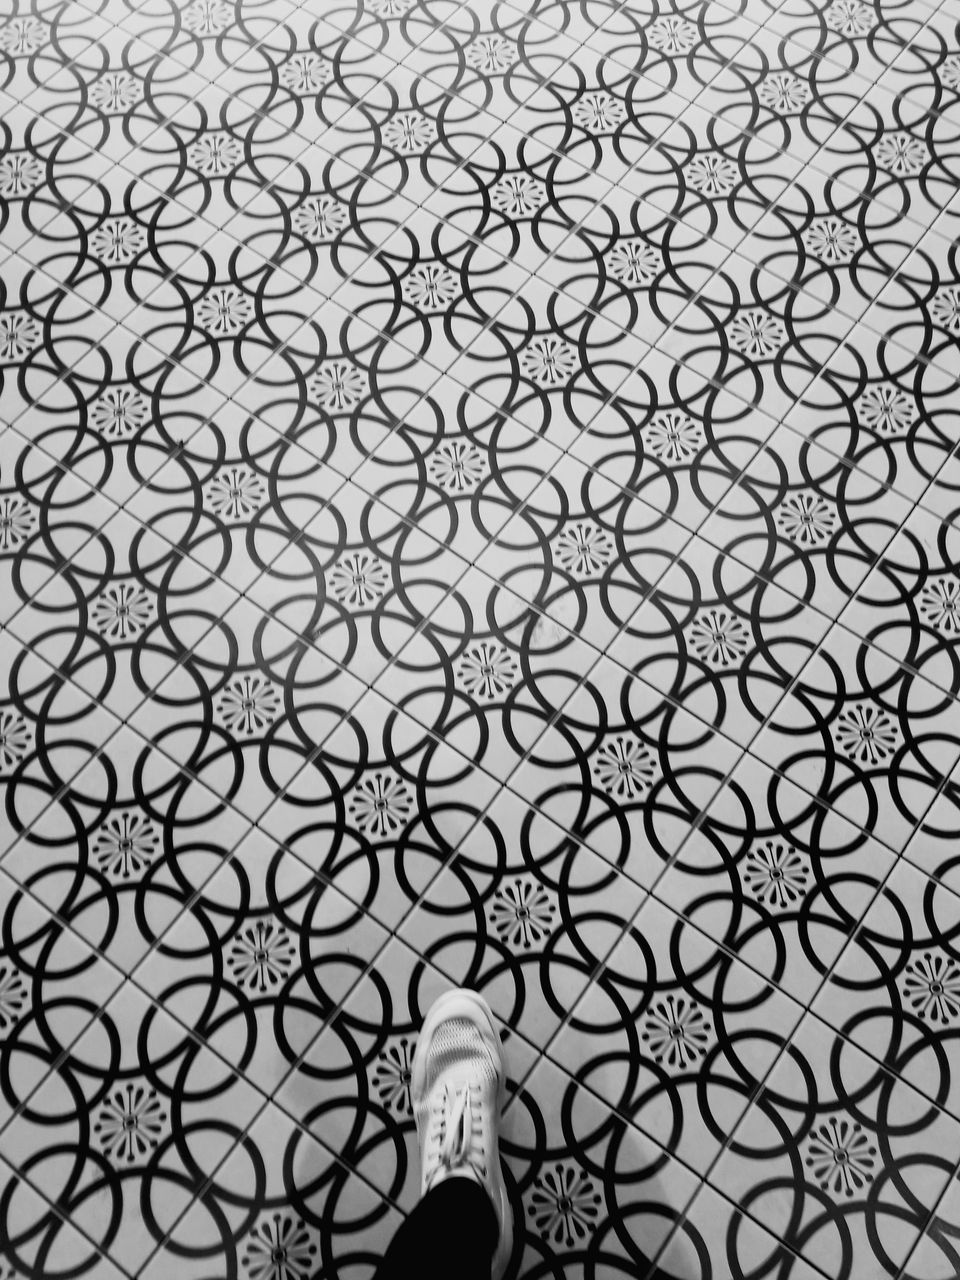 human leg, pattern, low section, shoe, human body part, real people, one person, personal perspective, body part, unrecognizable person, standing, flooring, design, lifestyles, human foot, day, leisure activity, tile, shape, tiled floor, human limb, floral pattern